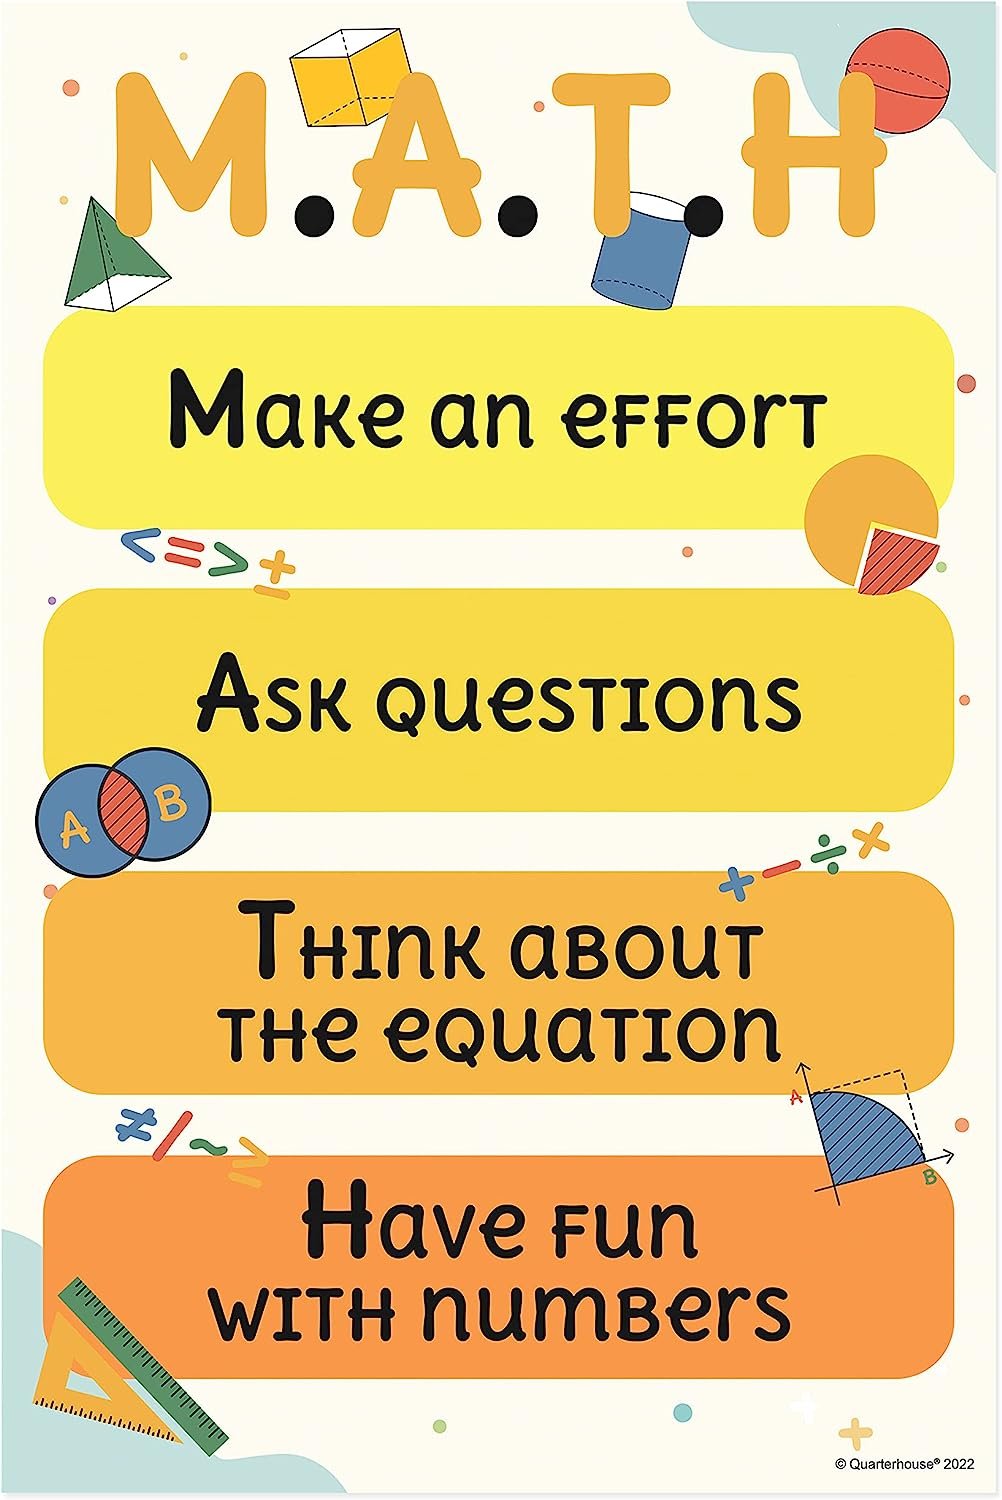 Quarterhouse Science, Math, Social Studies, and English Motivational Poster Set, Elementary Classroom Learning Materials for K-12 Students and Teachers, Set of 4, 12 x 18 Inches, Extra Durable